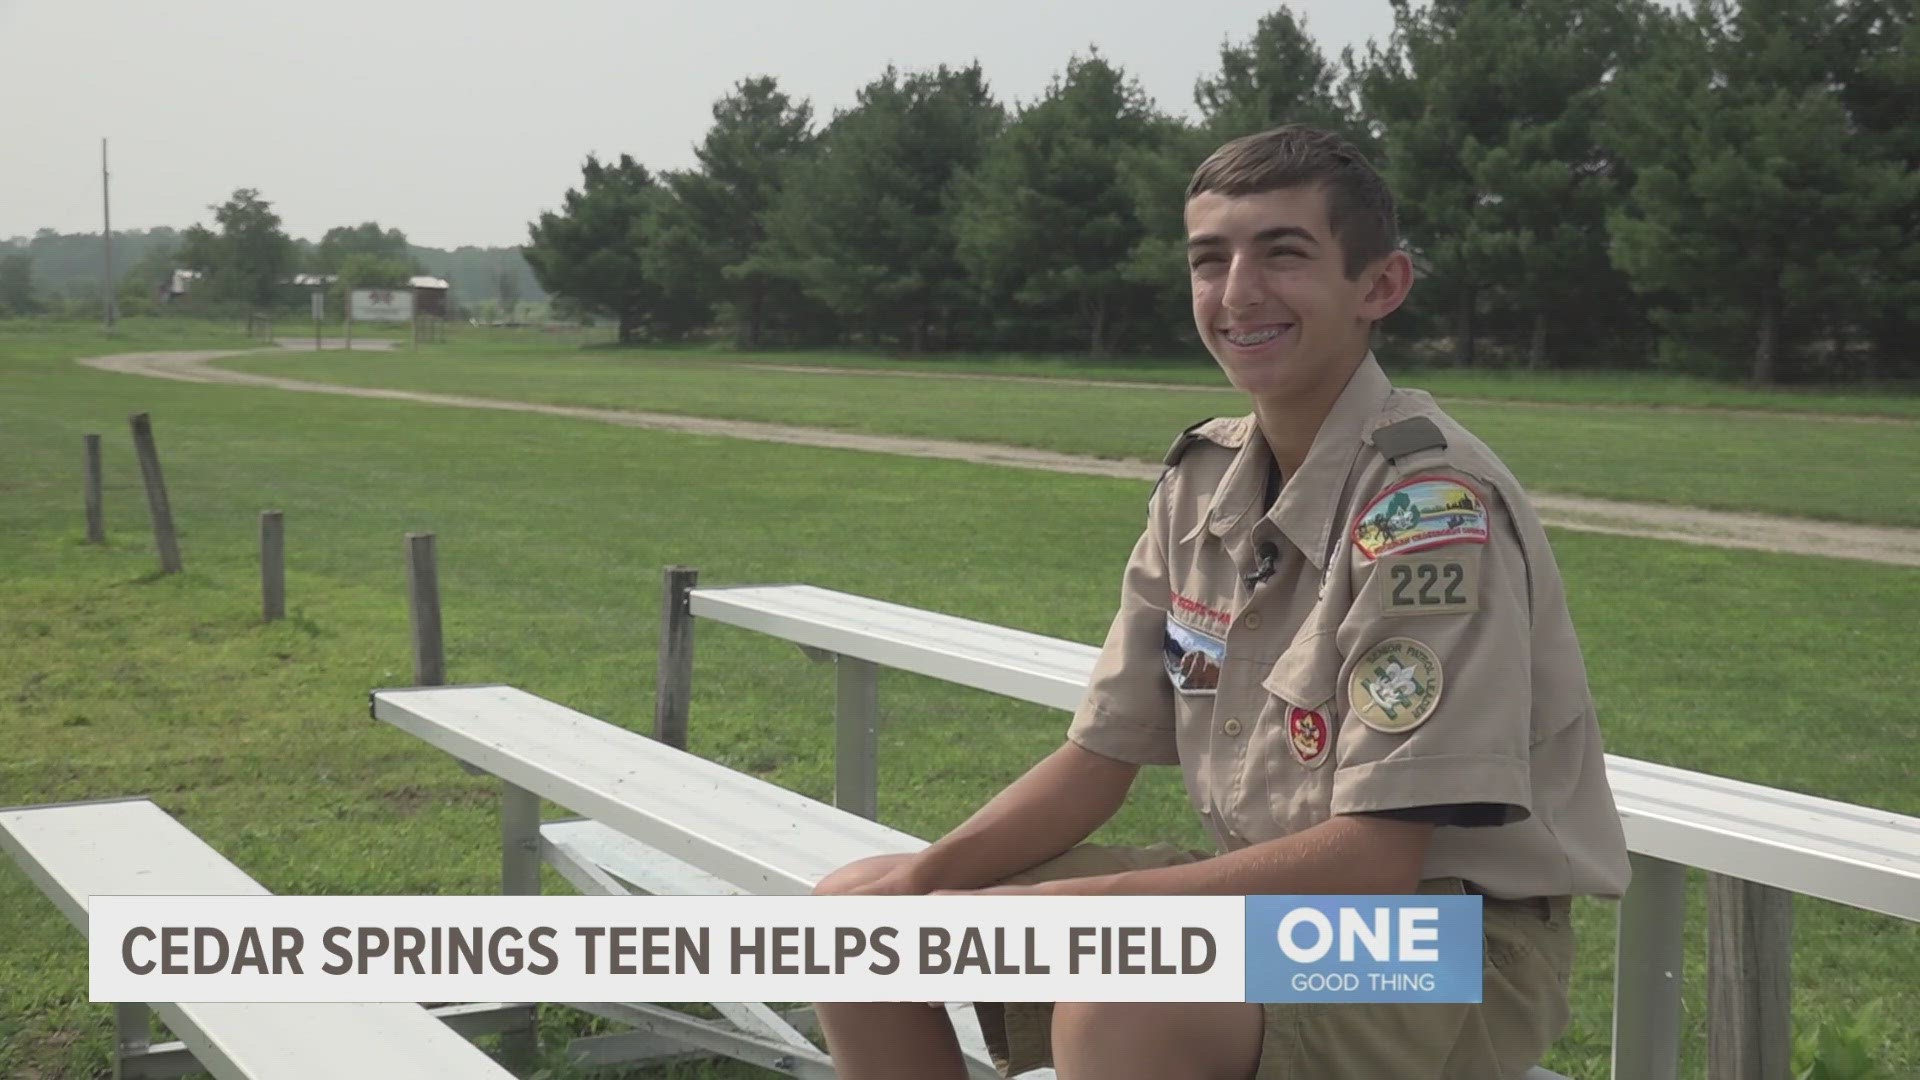 Logan Redes has been working for months to raise $30,000 to preserve the baseball and softball complex where he learned to play.